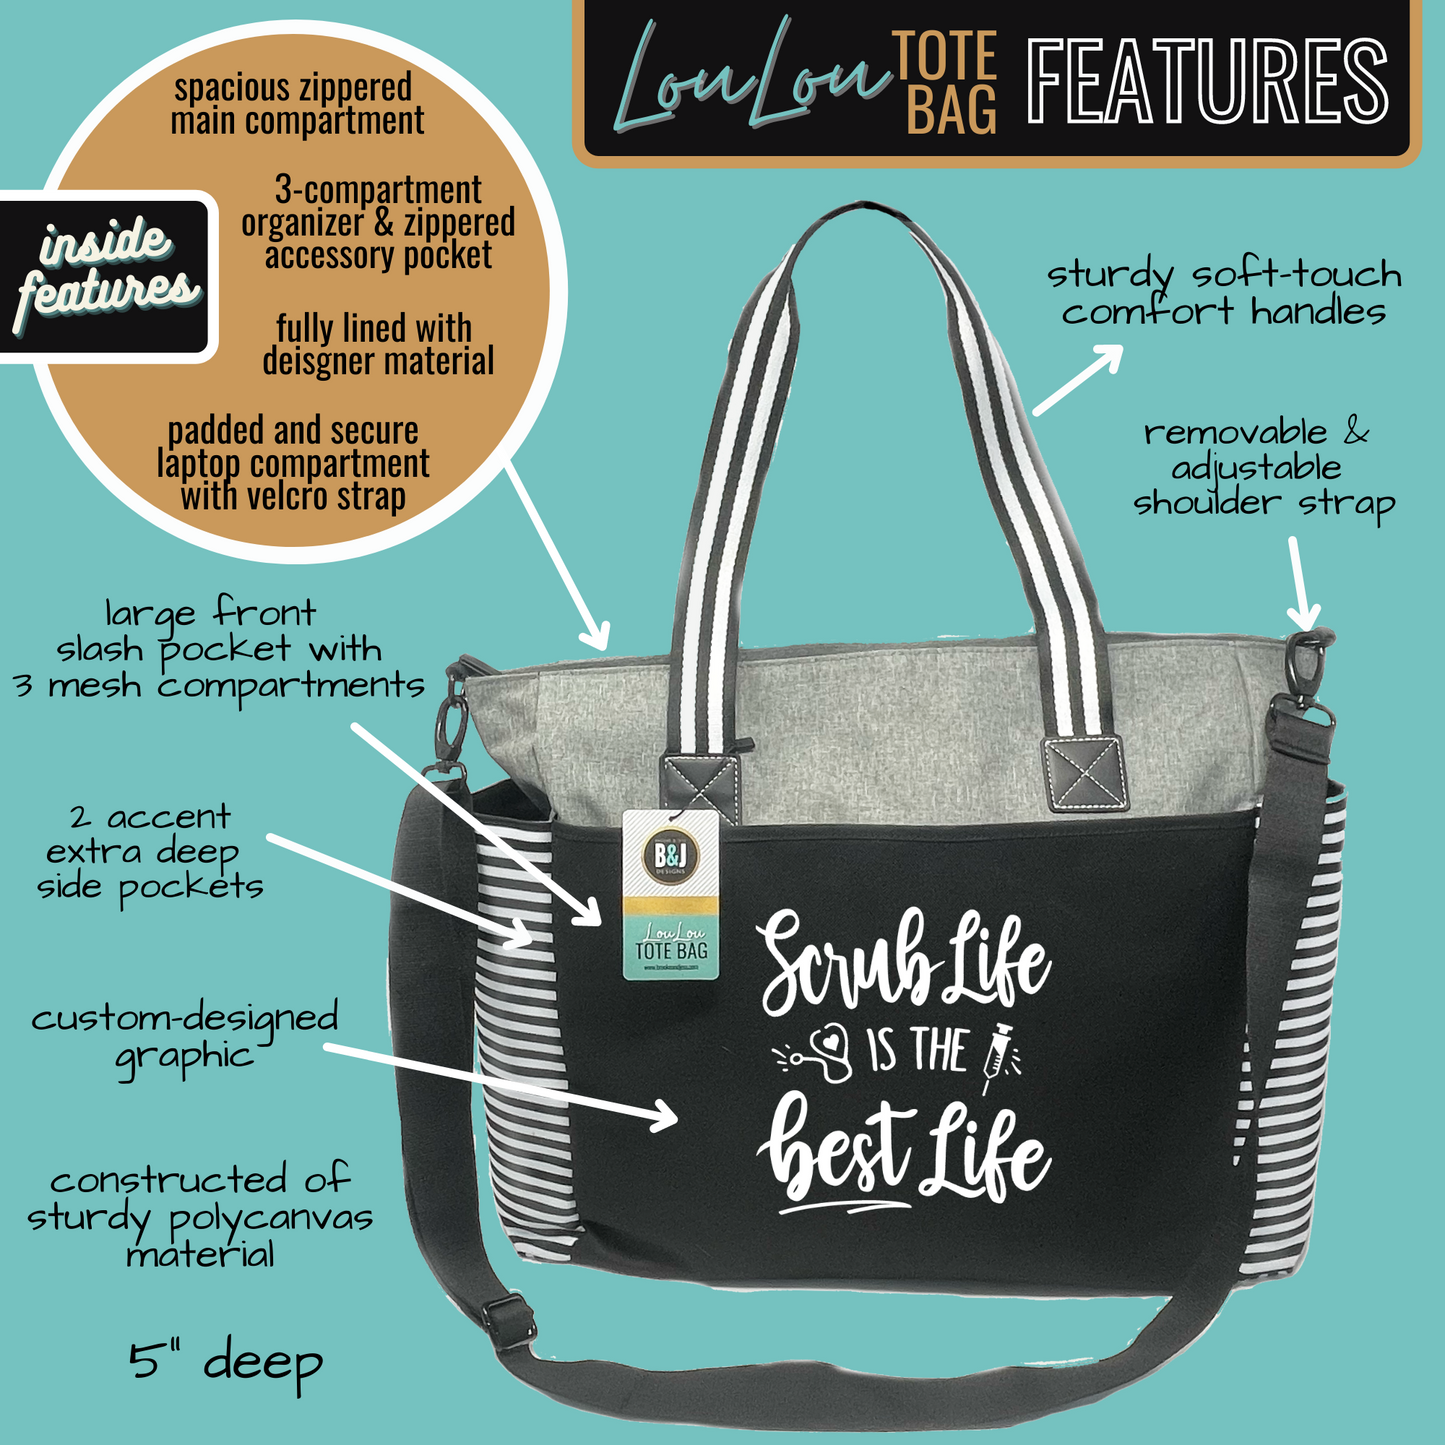 Scrub Life LouLou Gray Tote Bag for Medical Workers - Outlet Deal Utah